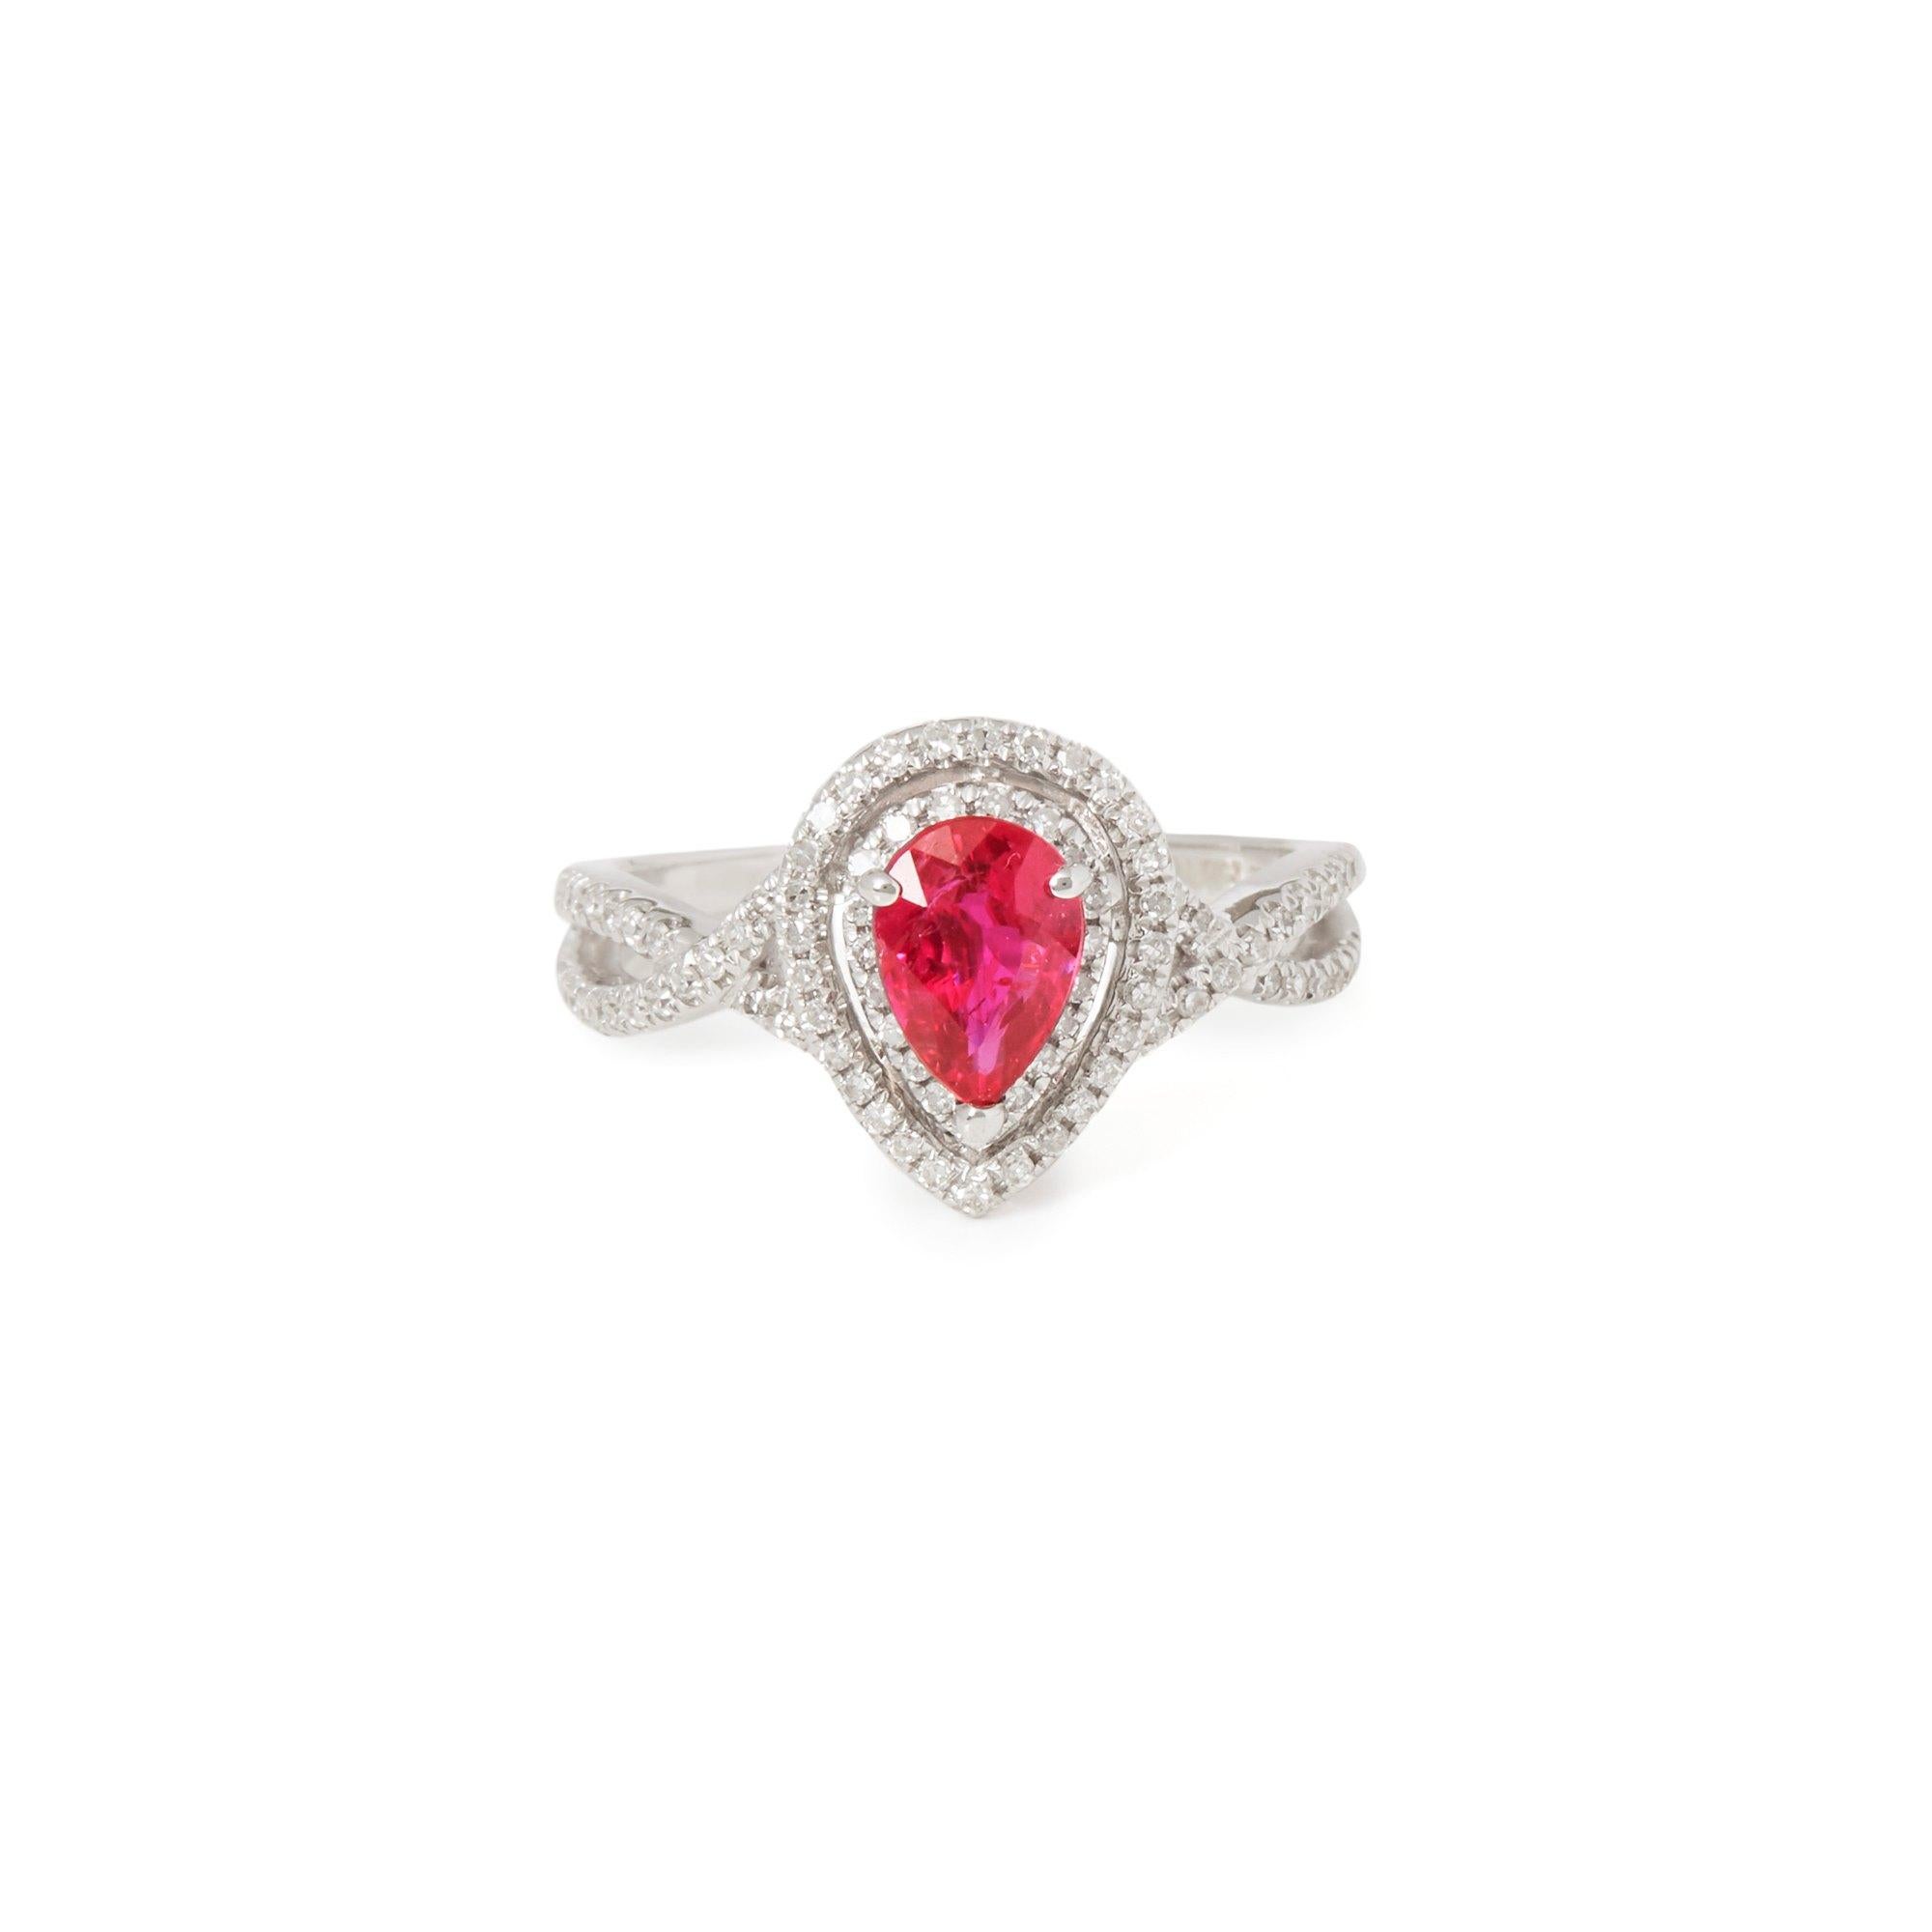 This ring designed by David Jerome is from his private collection and features one pear cut Ruby totalling 1.02cts sourced in Burma. Set with round brilliant cut Diamonds totalling 0.57cts mounted in an 18k white gold setting. UK finger size M 1/2,